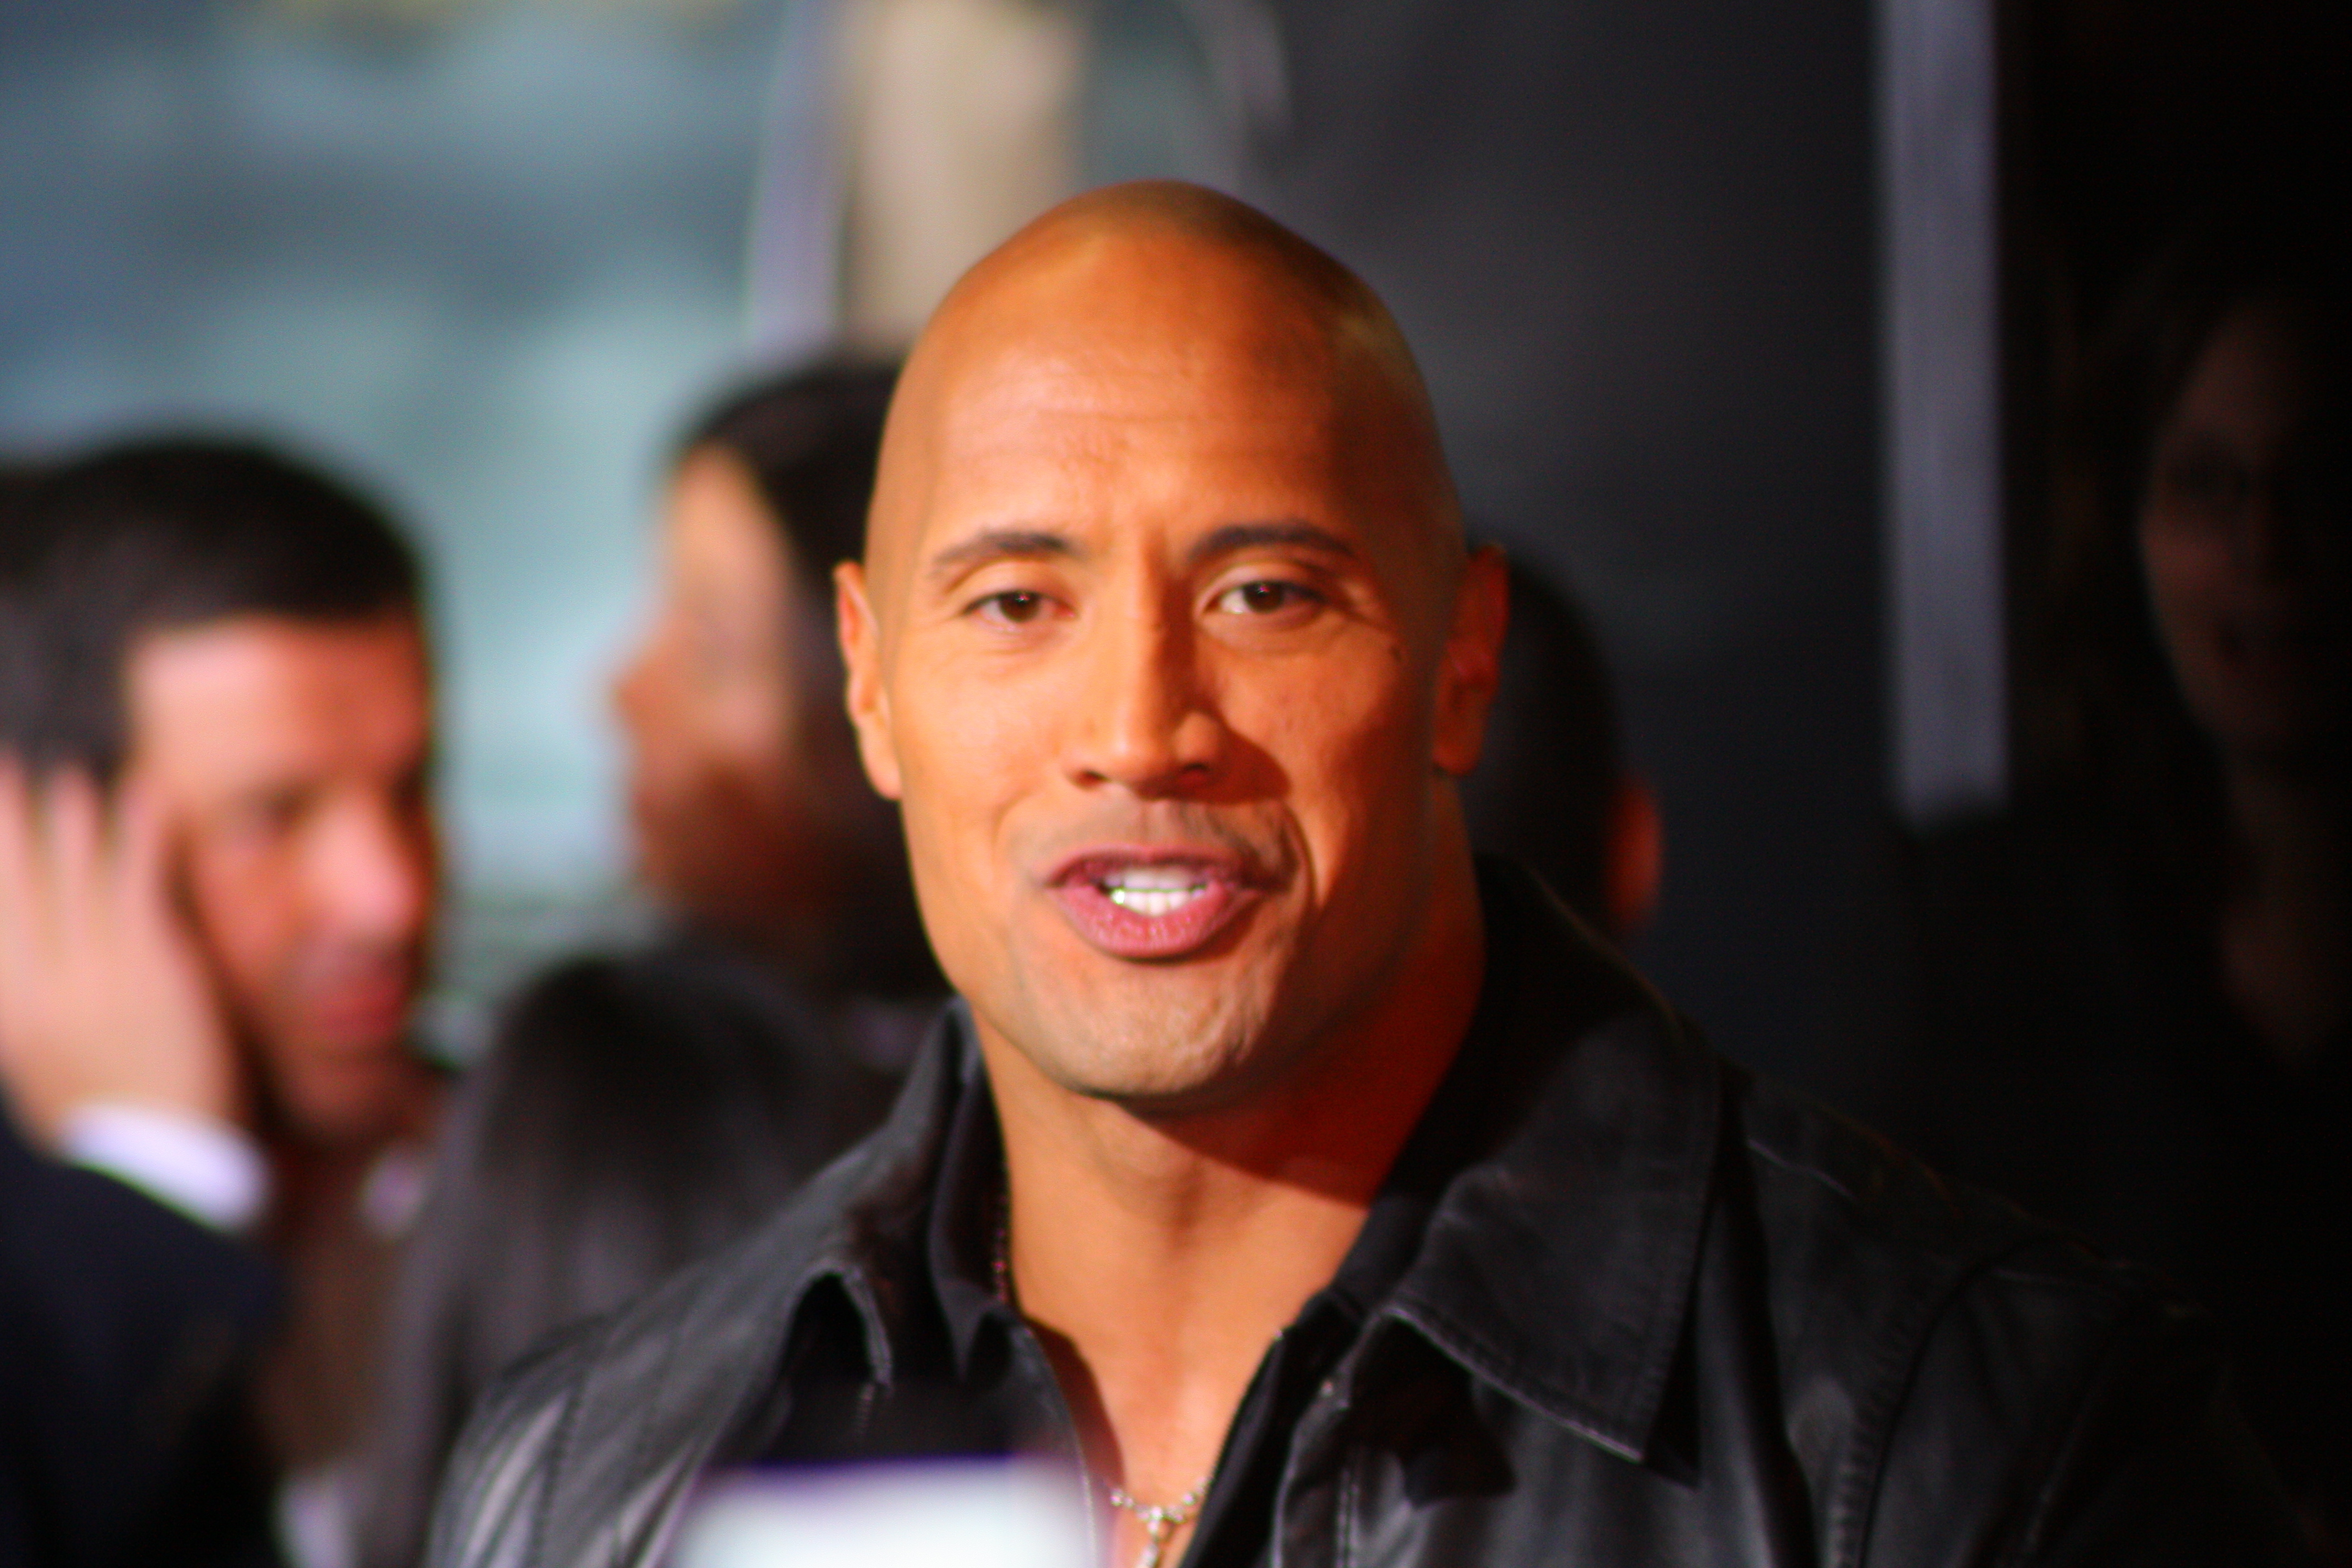 Celebrity Dwayne The Rock Johnson launched tequila sells one million cases, web fans are overjoyed